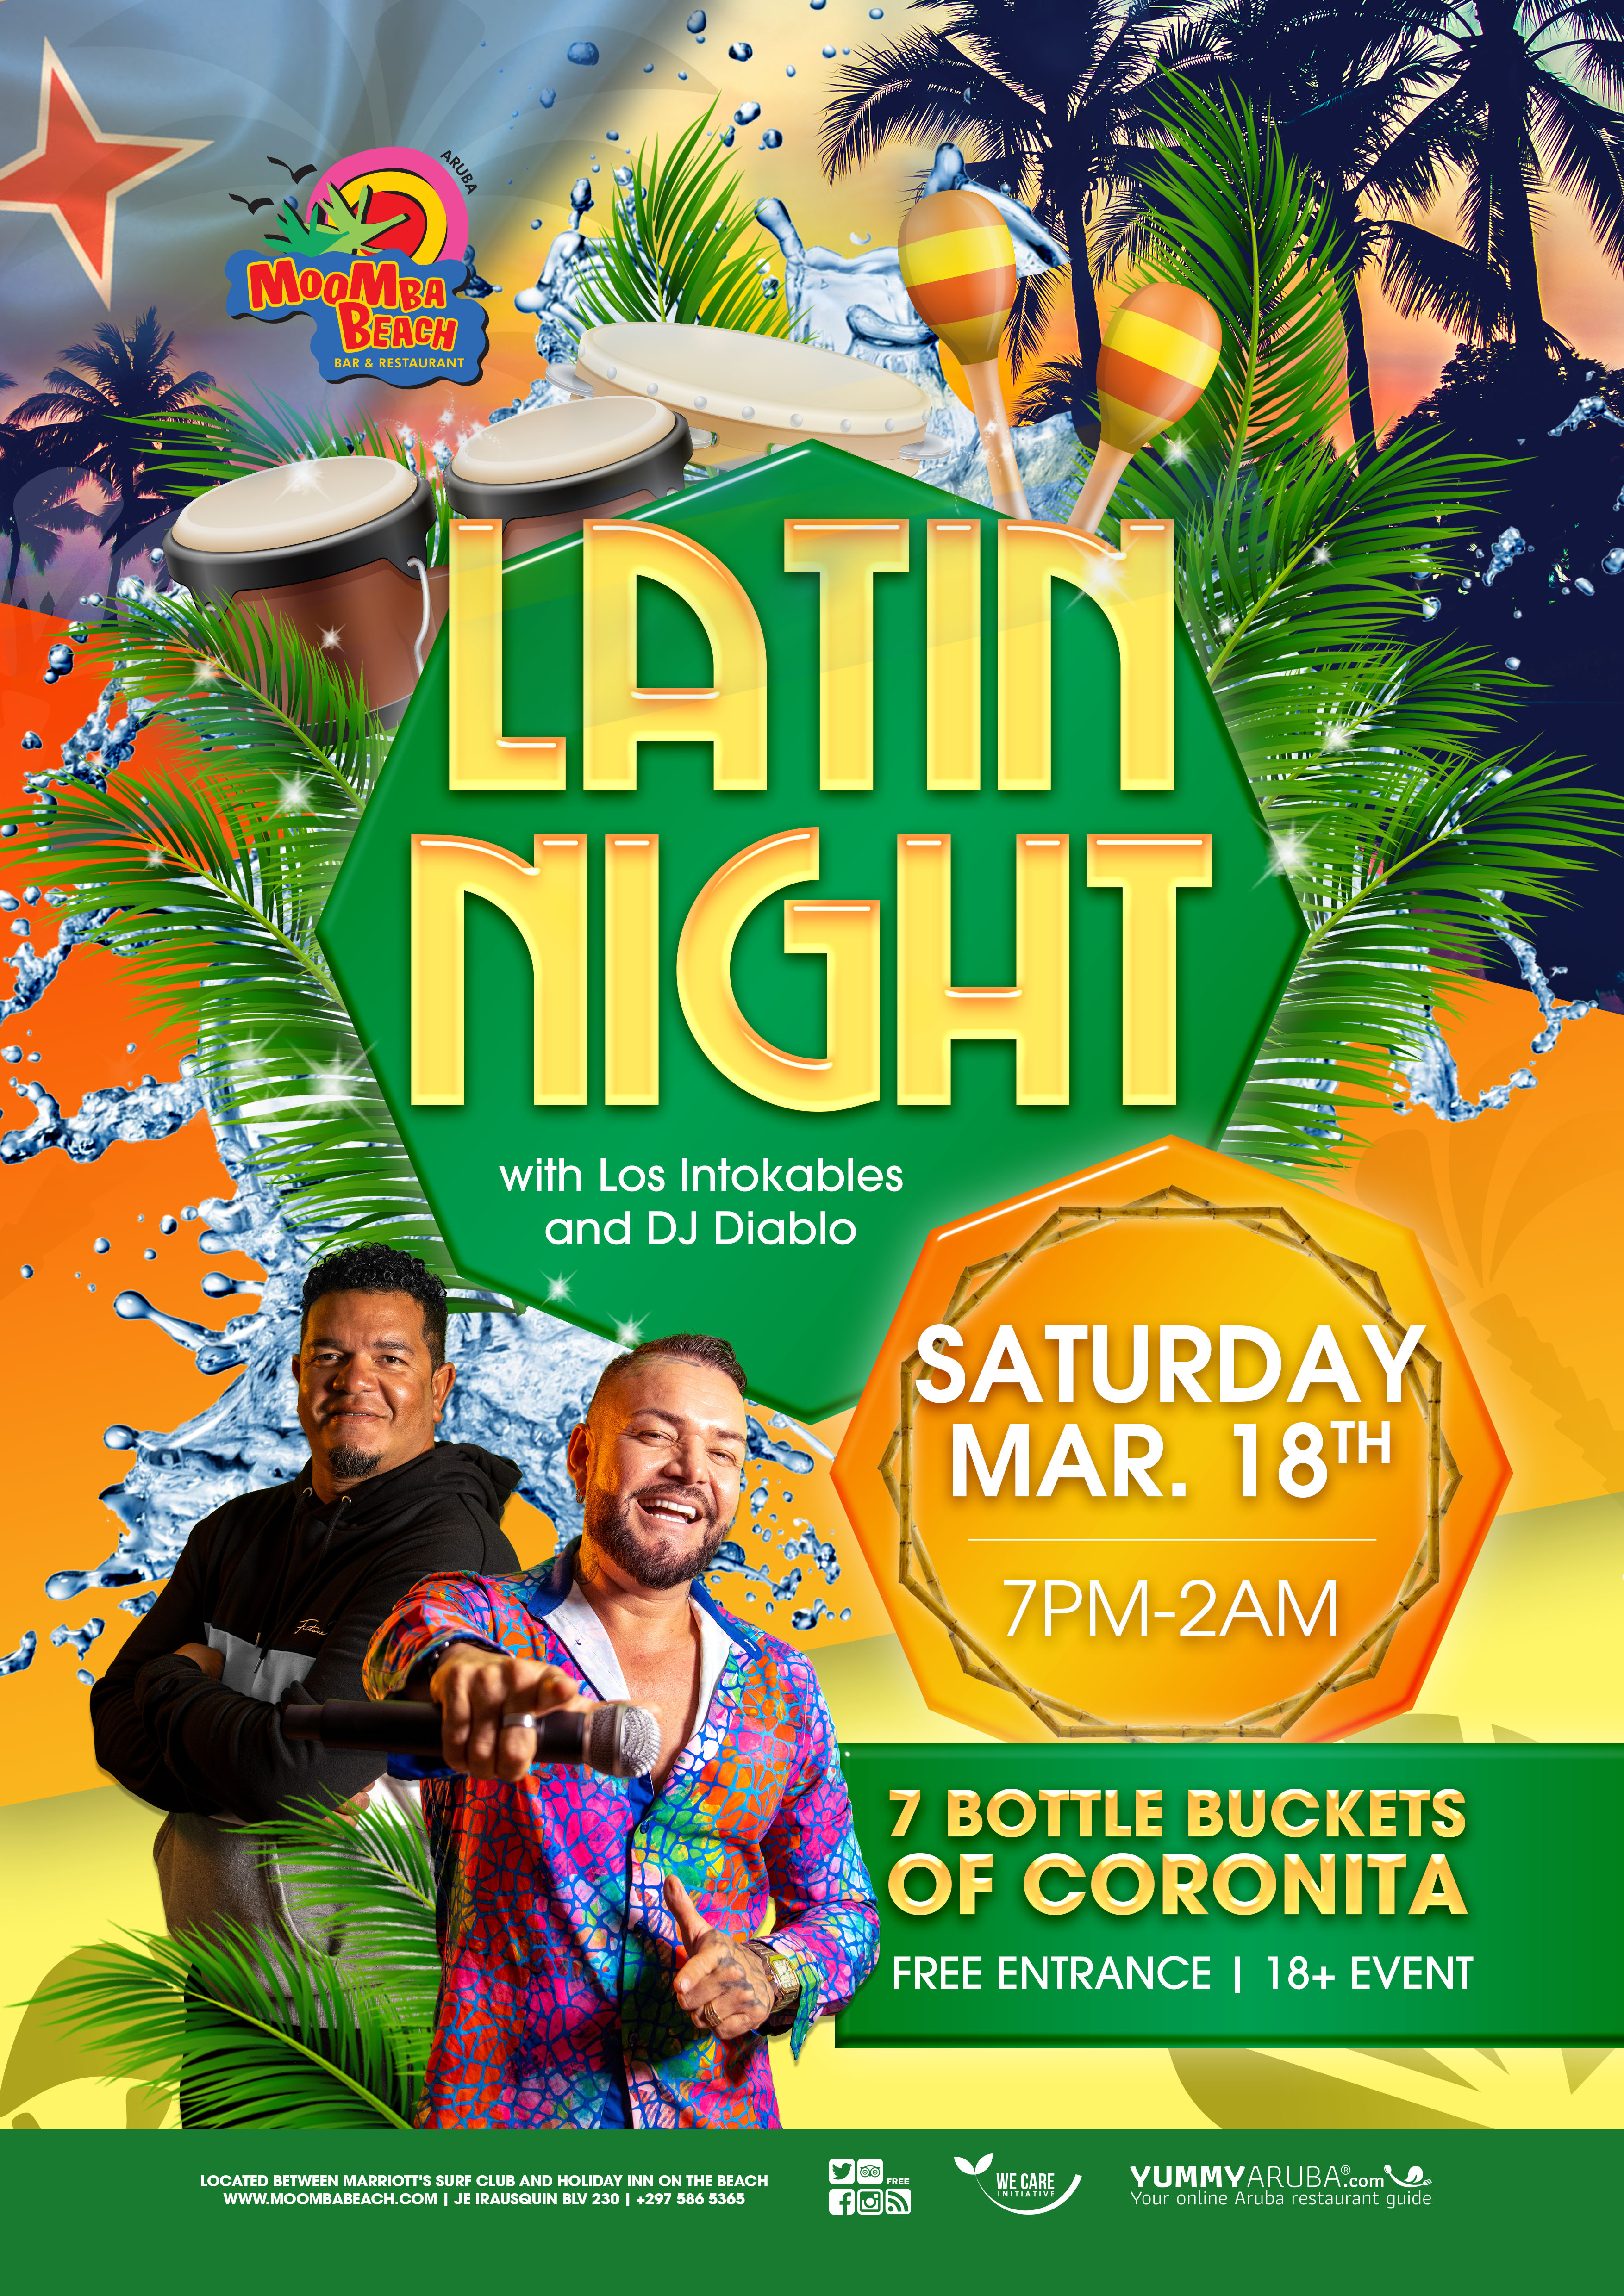 Get ready for an unforgettable night at MooMba Beach! On Saturday, March 18th, we'll be hosting our highly anticipated Latin Night event. Starting at 7PM, join us as we kick off the evening with live music by Latin Grammy Award Winner C-Zar and his band Los Intokables. With their electrifying performances and infectious beats, C-Zar and his band will have you dancing the night away.